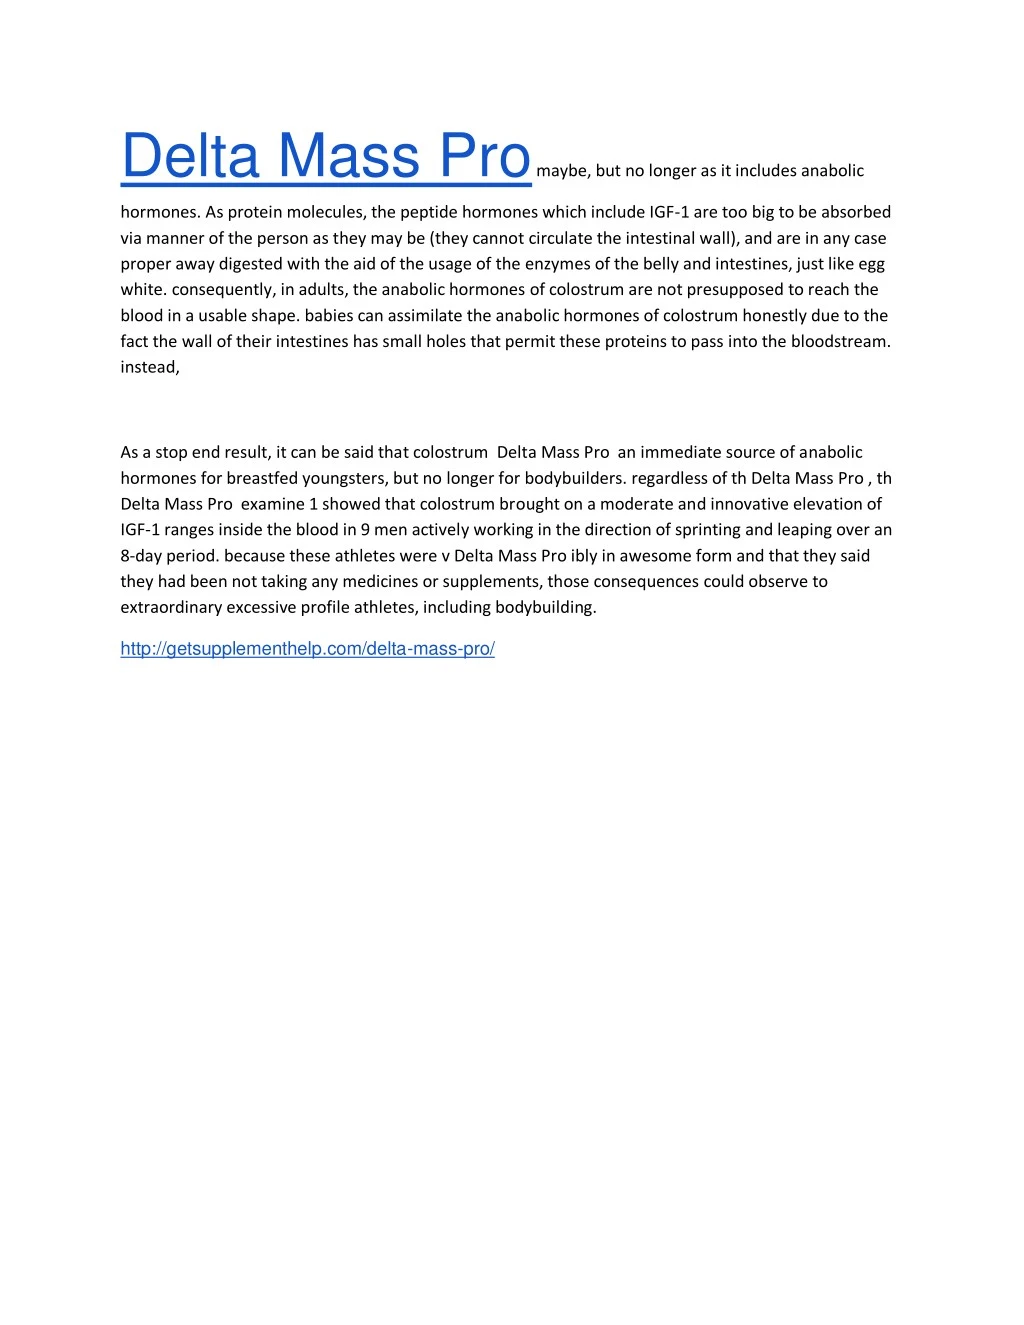 delta mass pro maybe but no longer as it includes